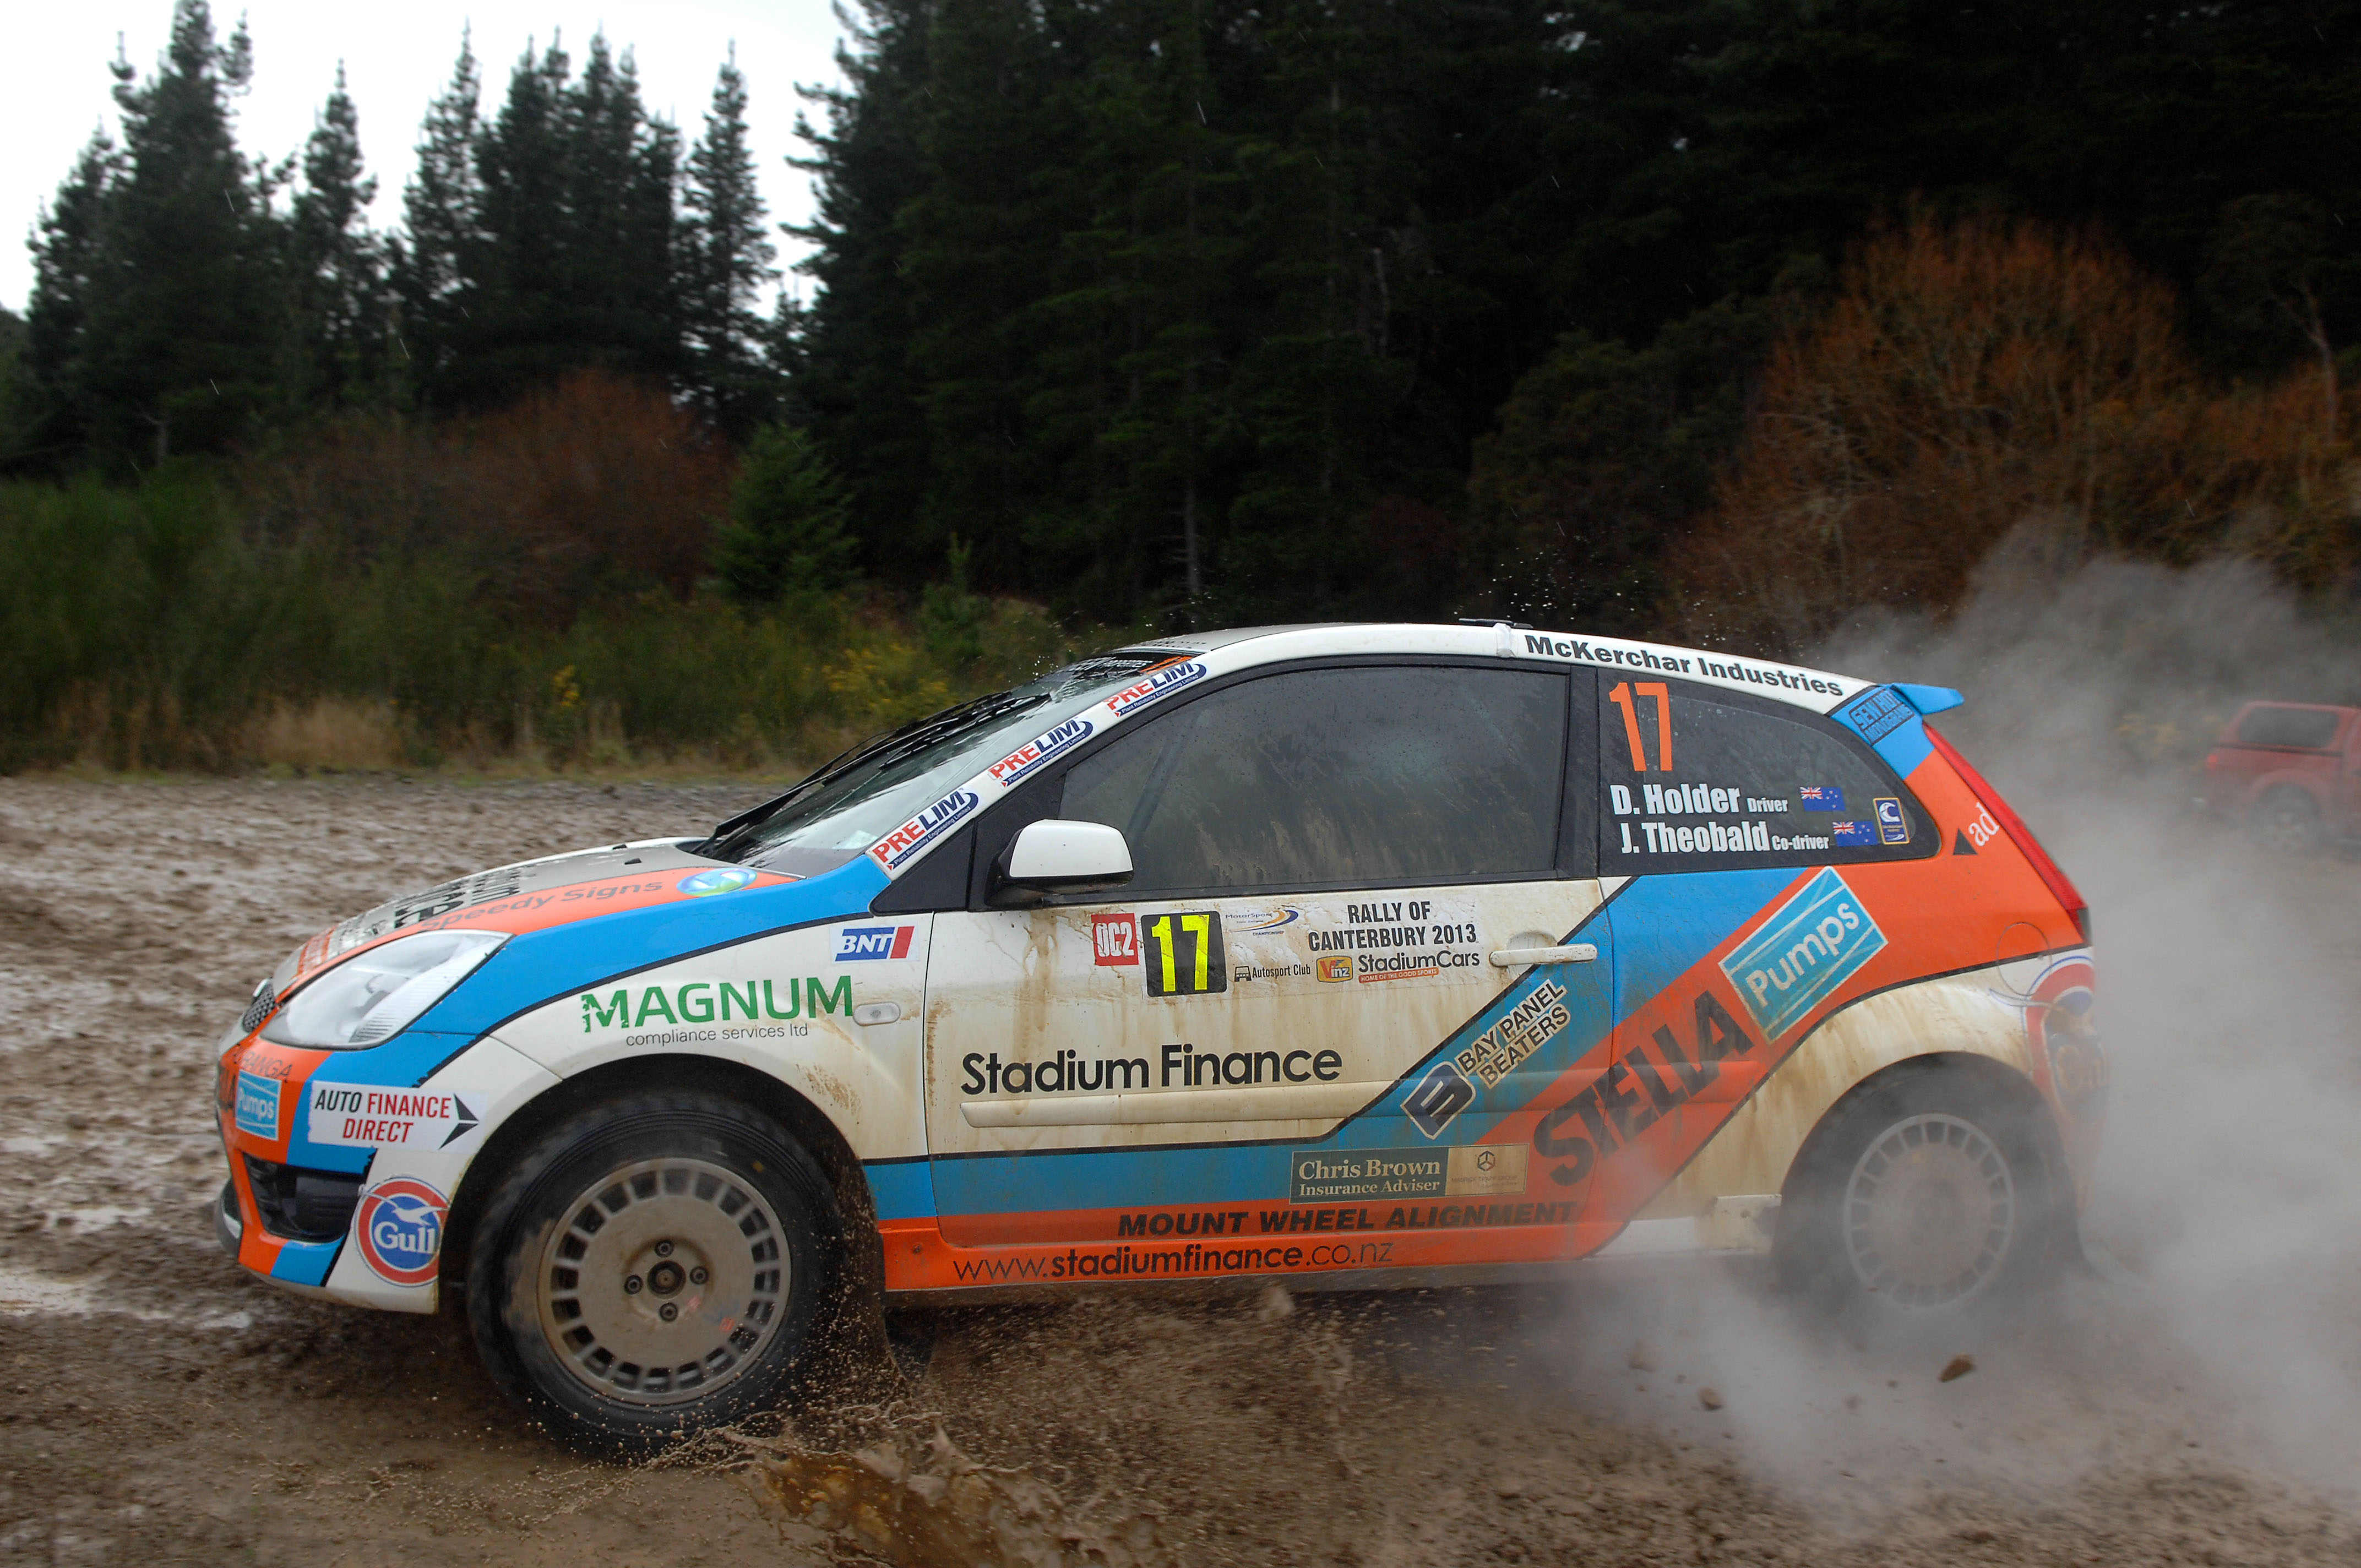 Gull continues to fuel NZ Rally Drivers